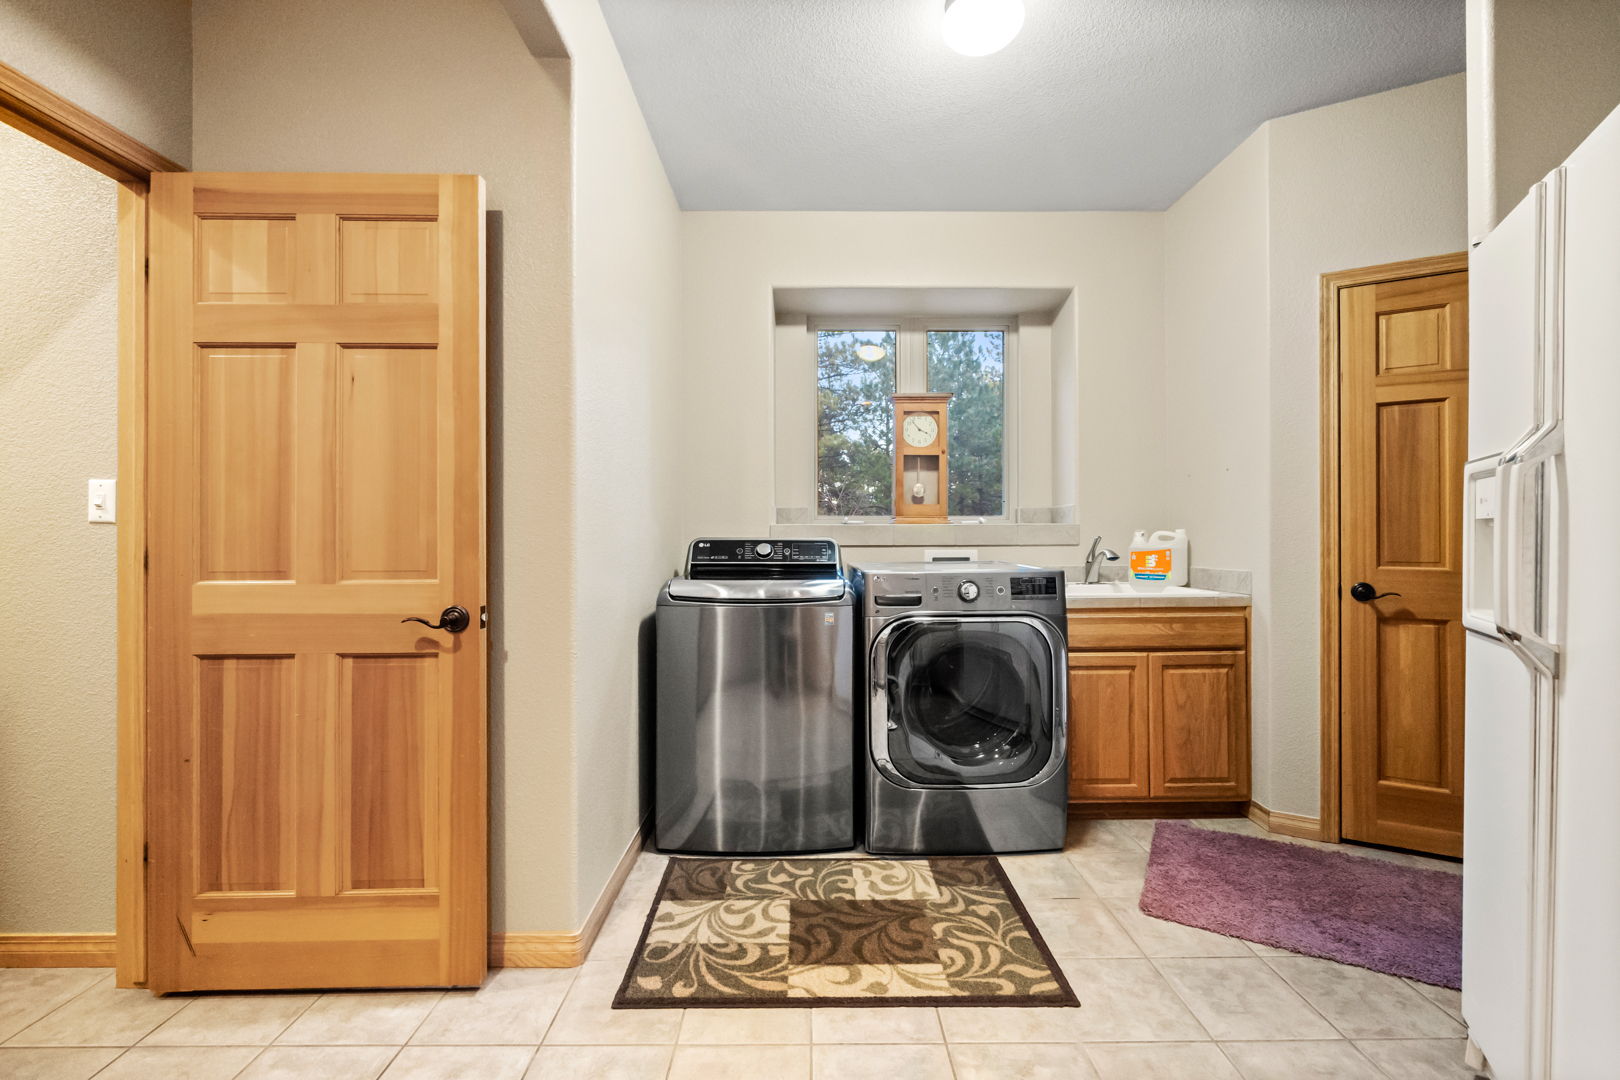 Huge mud room/laundry with fridge and cabinetry